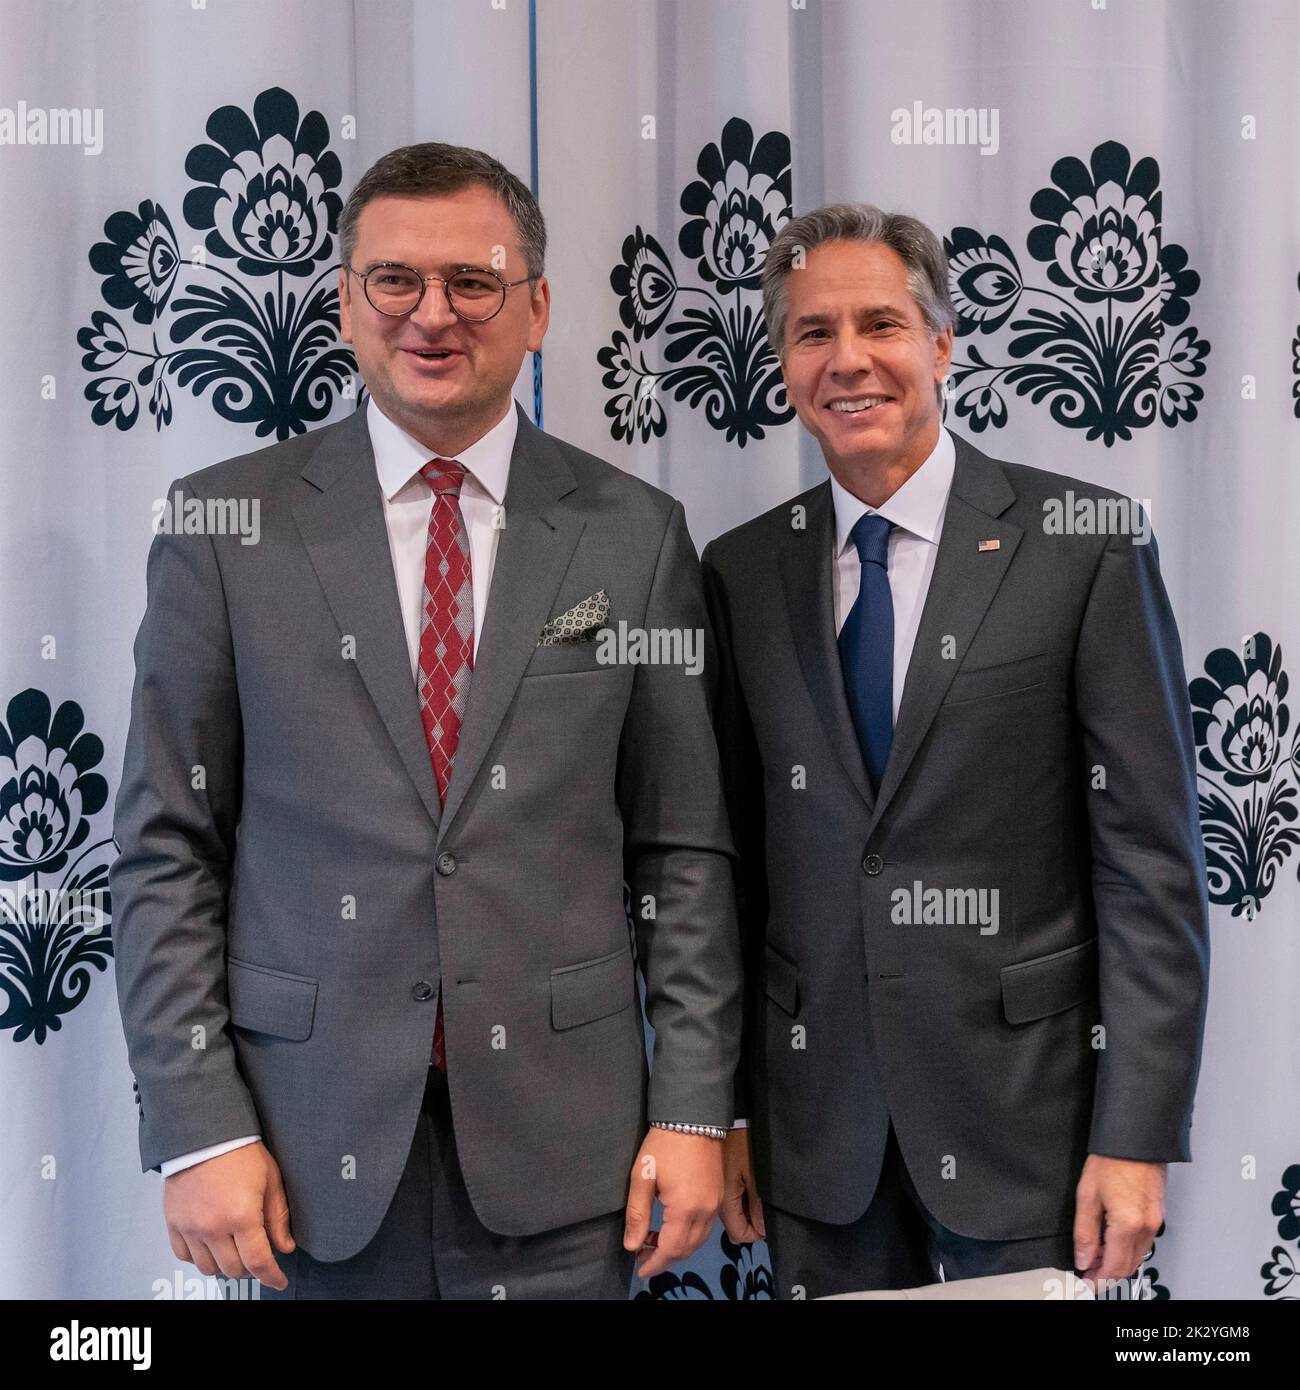 New York City, United States. 22nd Sep, 2022. U.S. Secretary of State Tony Blinken, right, stands with Ukrainian Foreign Minister Dmytro Kuleba, left, before the start of their bilateral meeting on the sidelines of the 77th Session of the U.N General Assembly, September 22, 2022, in New York City. Credit: Ron Przysucha/State Department Photo/Alamy Live News Stock Photo